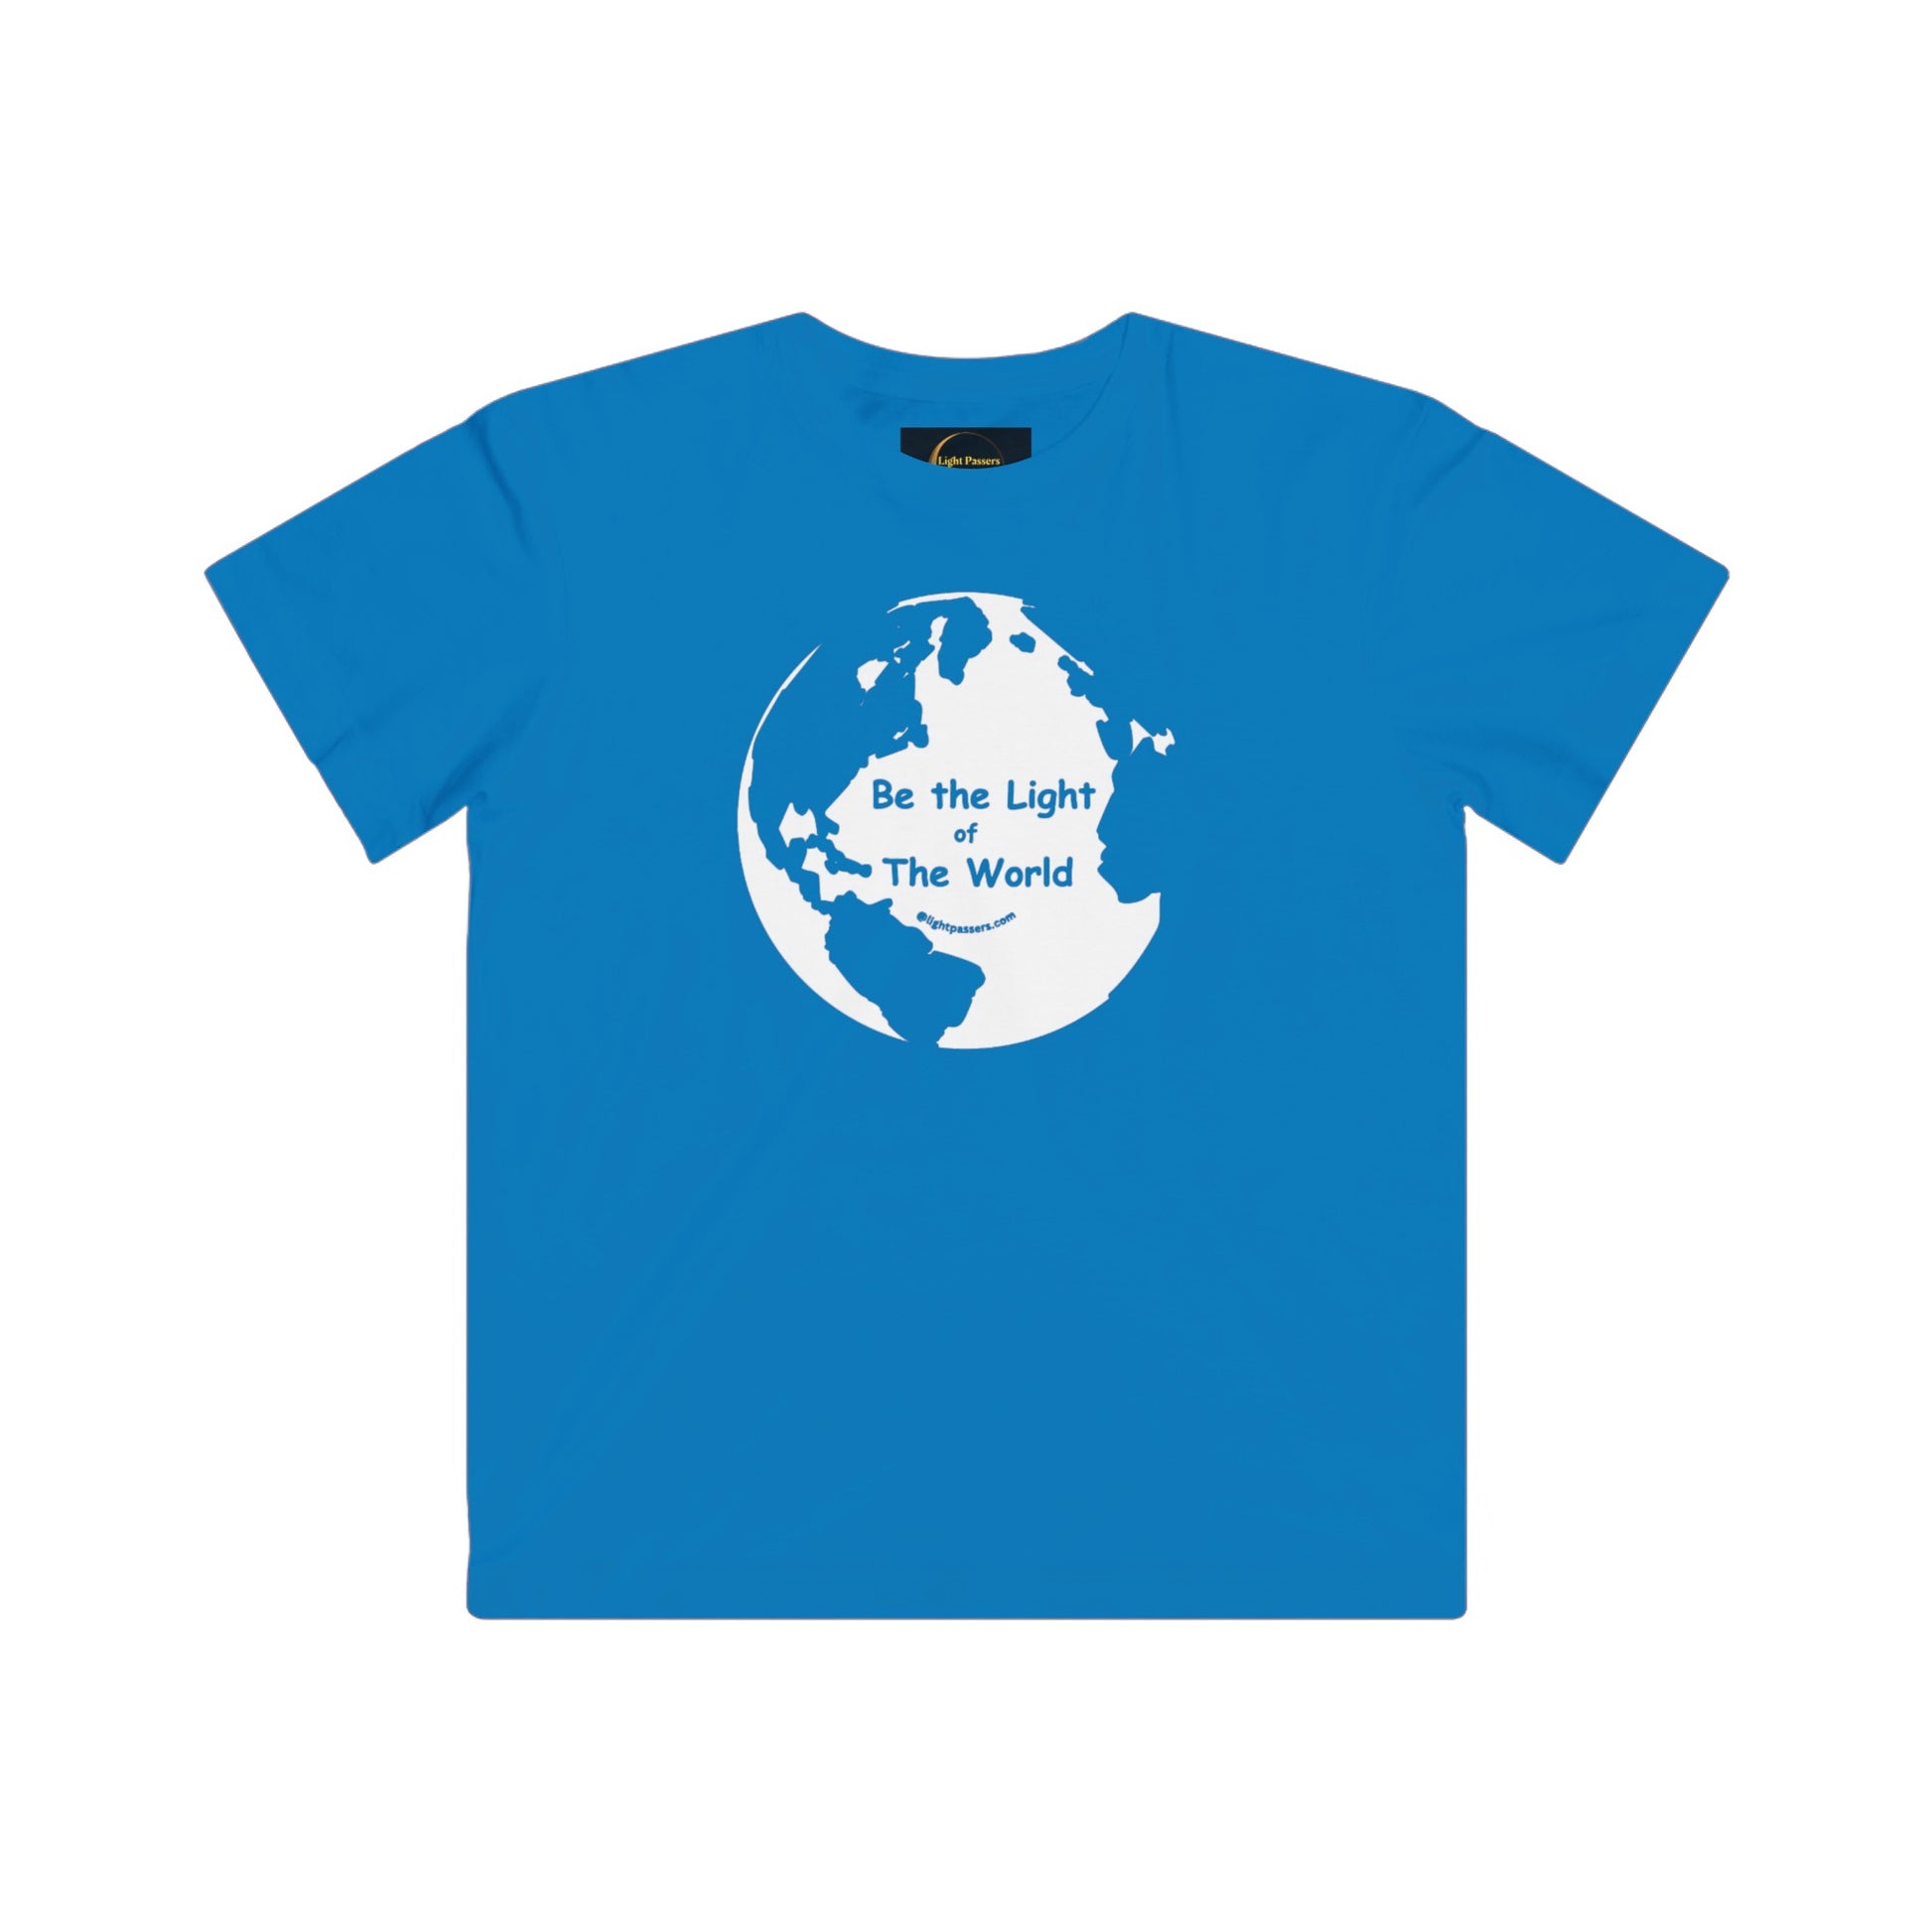 Youth t-shirt featuring a blue shirt with a white globe design. Made of soft cotton, light fabric, regular fit, tear away label. Be the Light of the World theme.